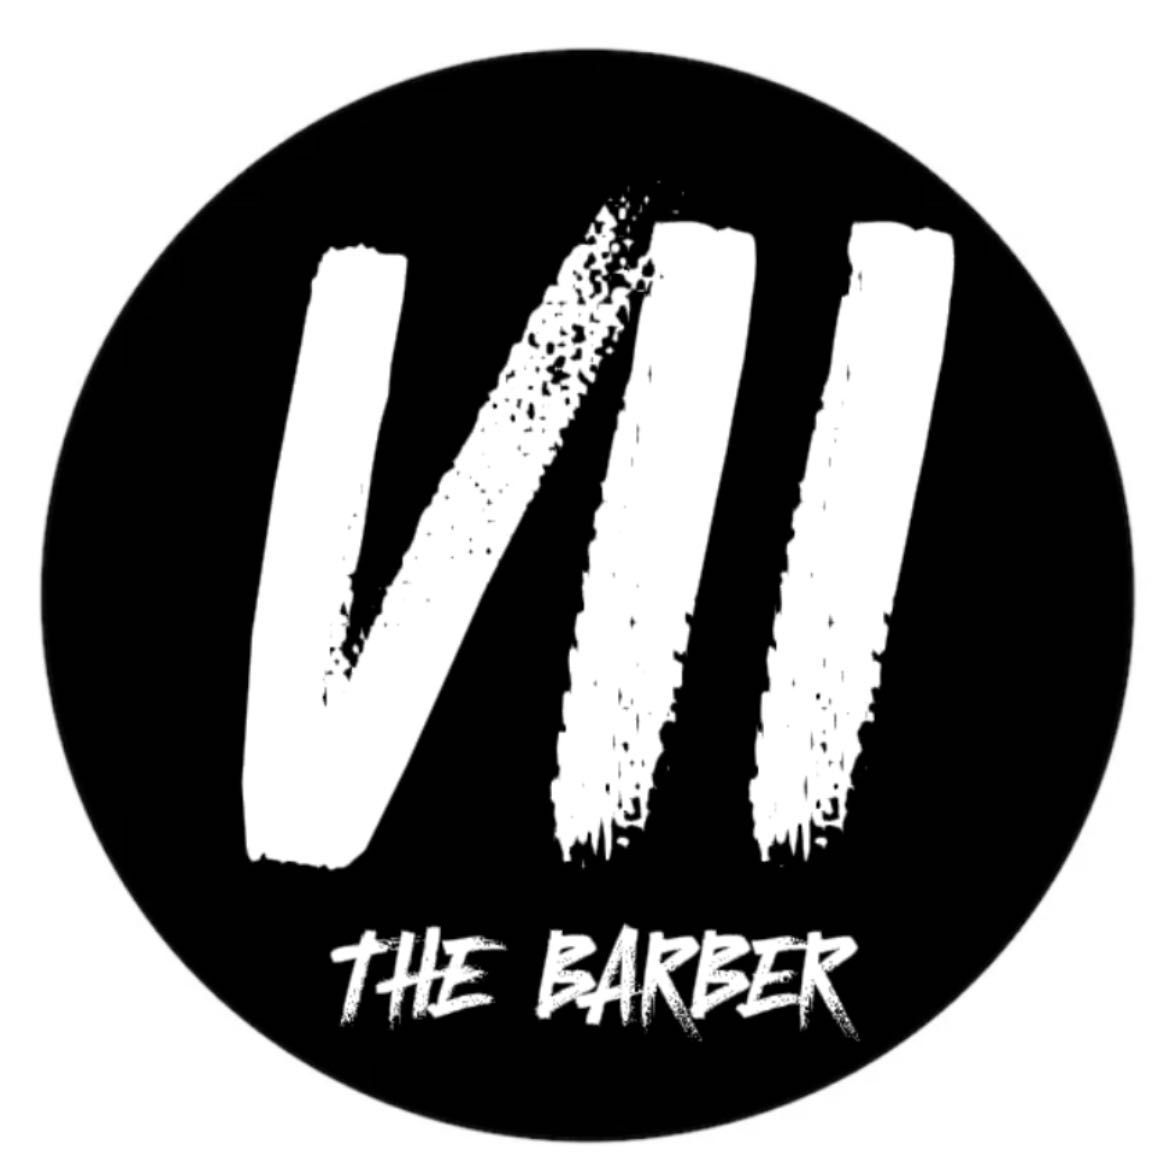 7 THE BARBER💈, 6935 Farm to Market 1960 Rd W, Suite 15, Houston, 77069